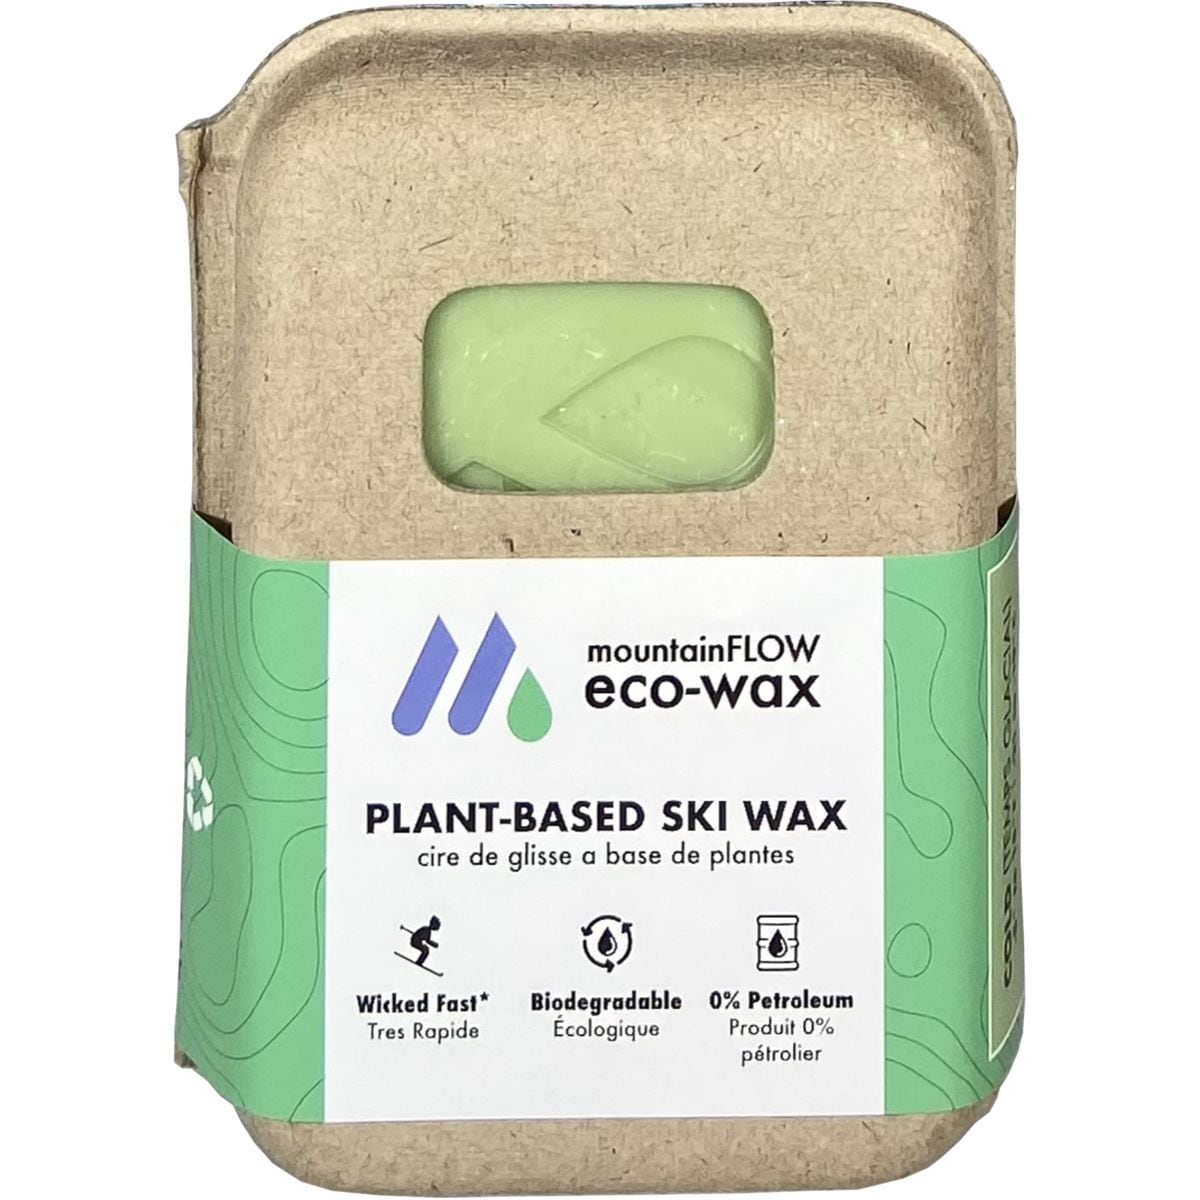 MountainFLOW Hot Wax Cold